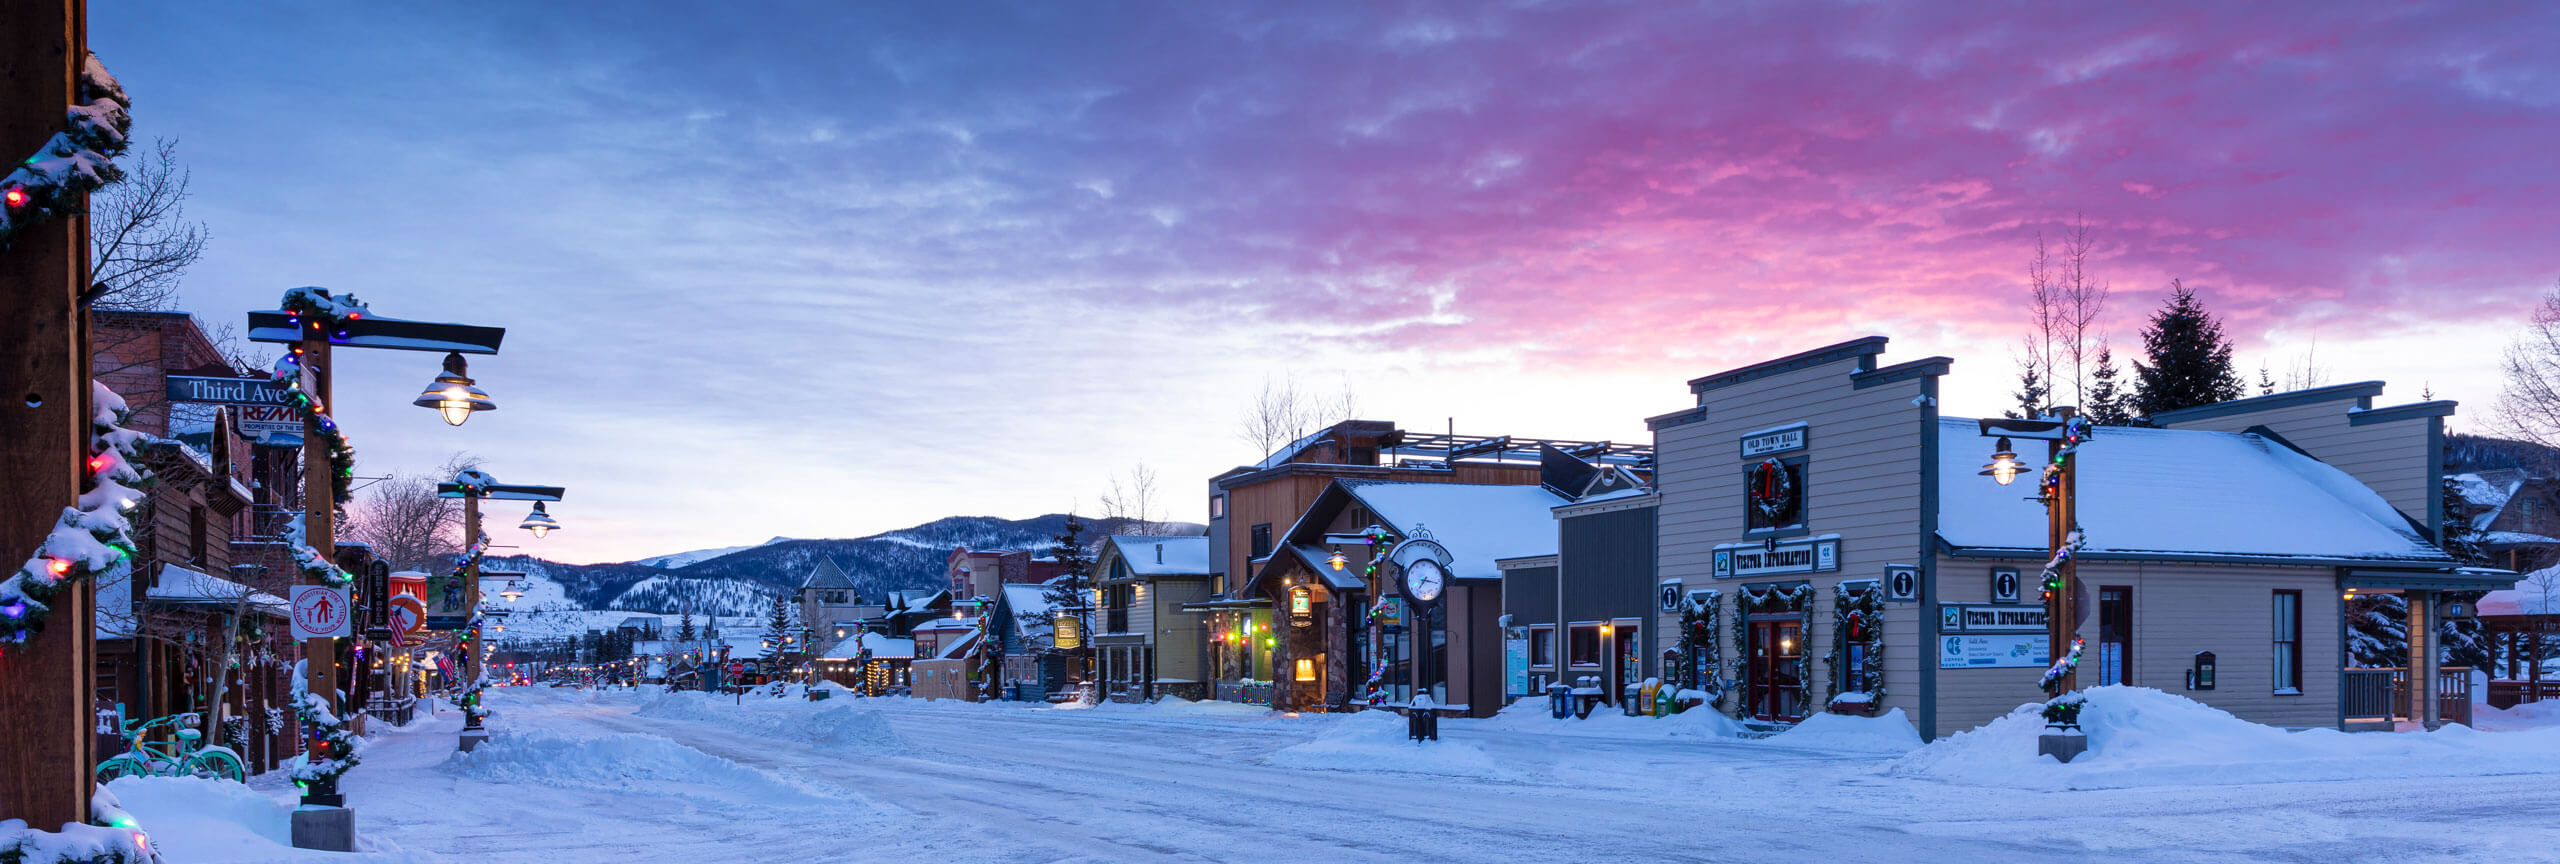 Dawn over a snowy Main Street and Visitor Information Center.